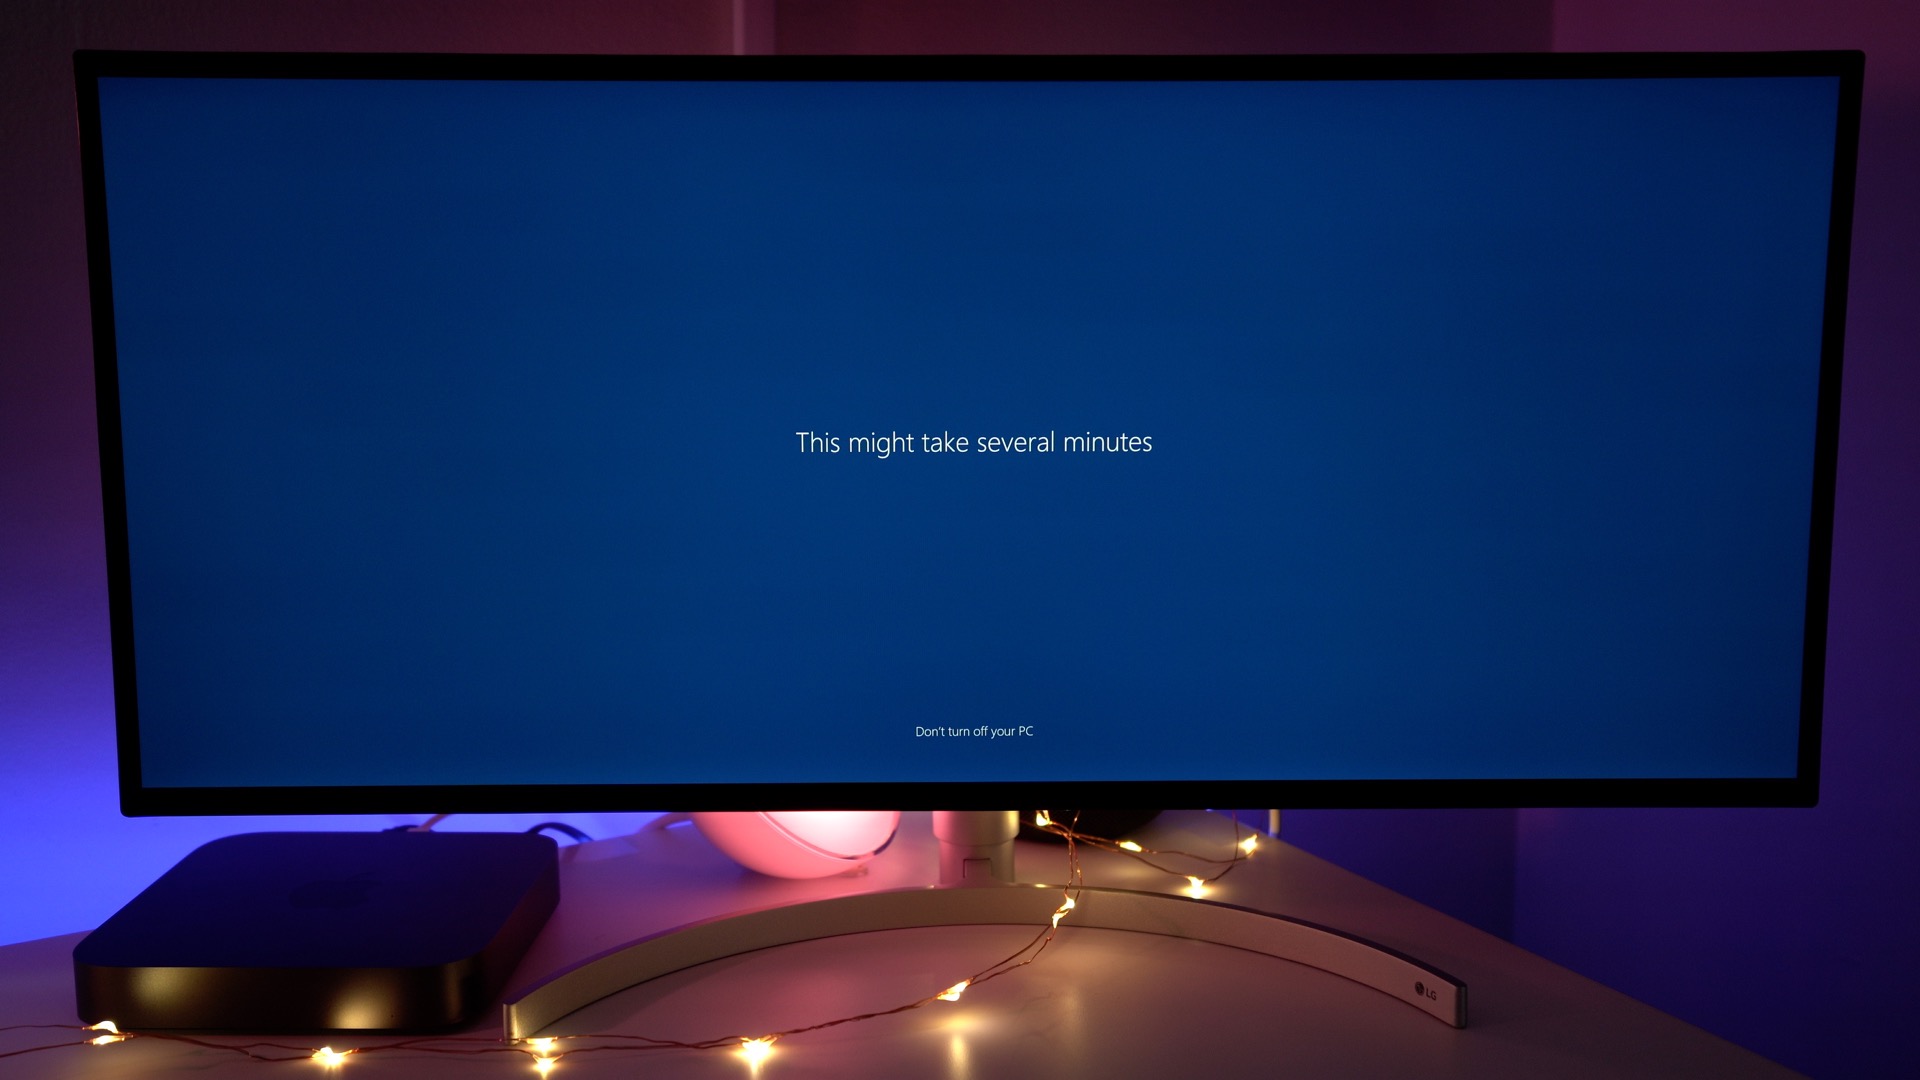 install boot camp assistant windows 10